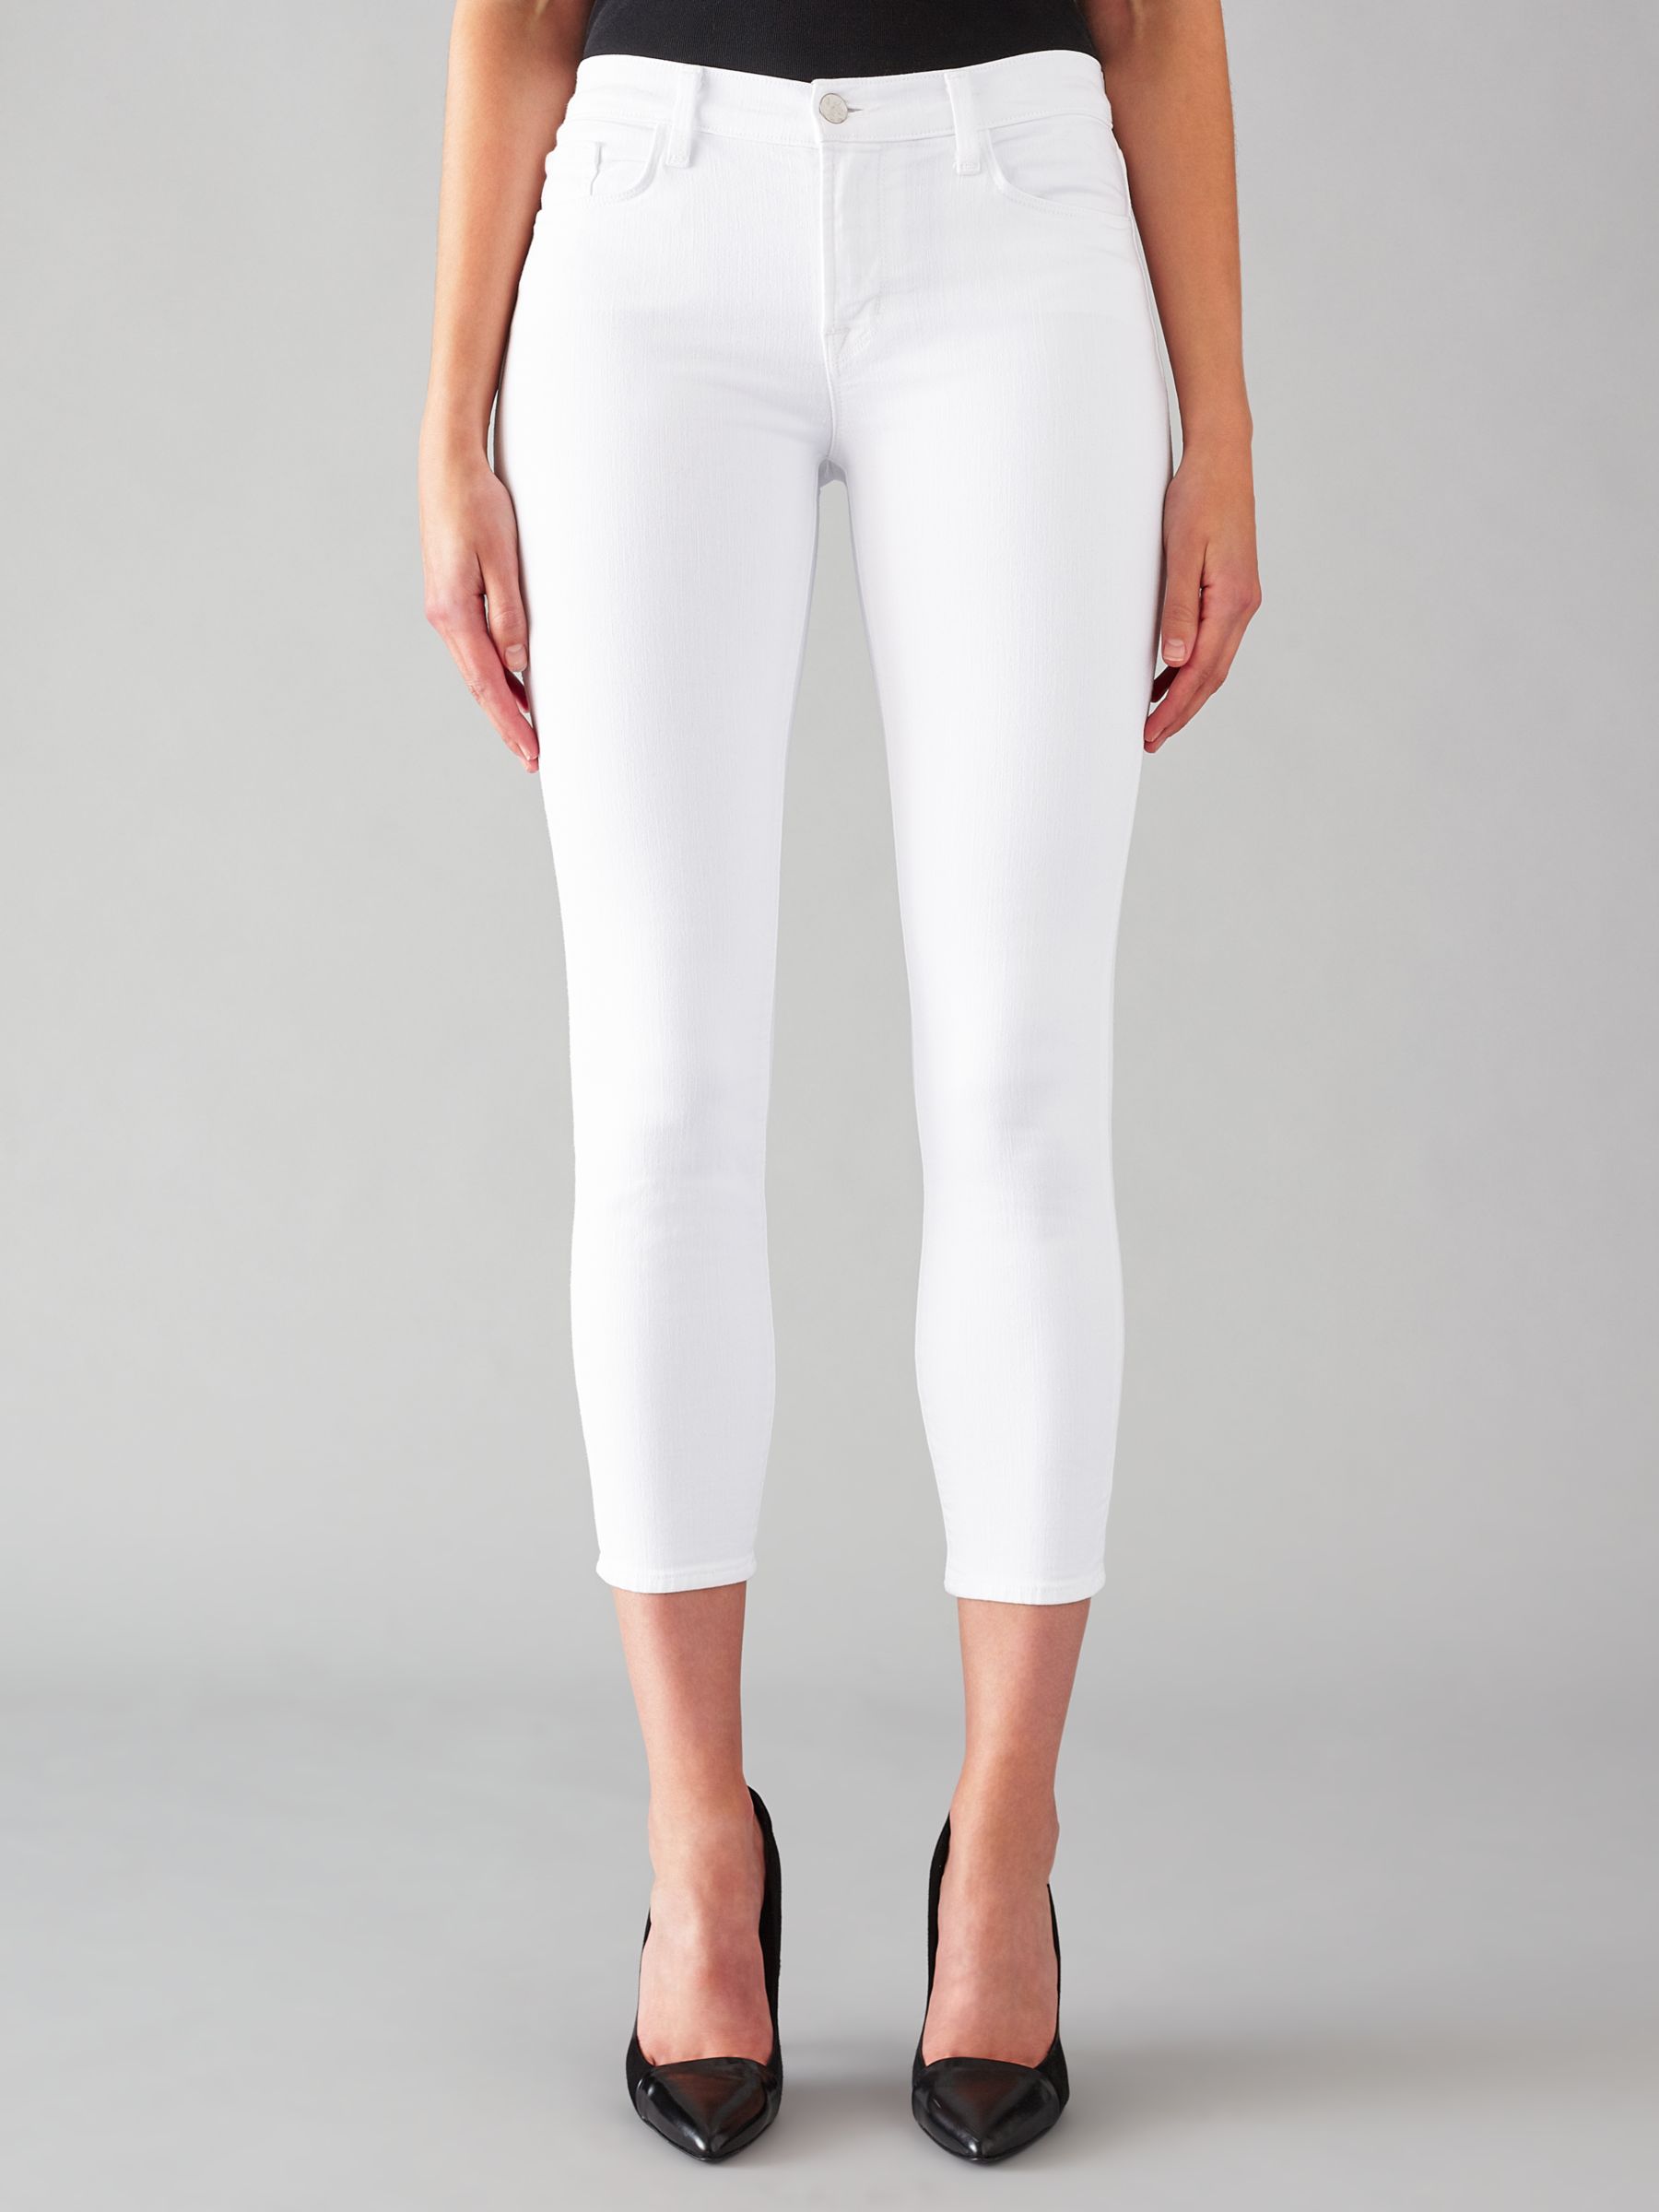 J Brand 835 Mid Rise Cropped Skinny Jeans, Blanc, 25